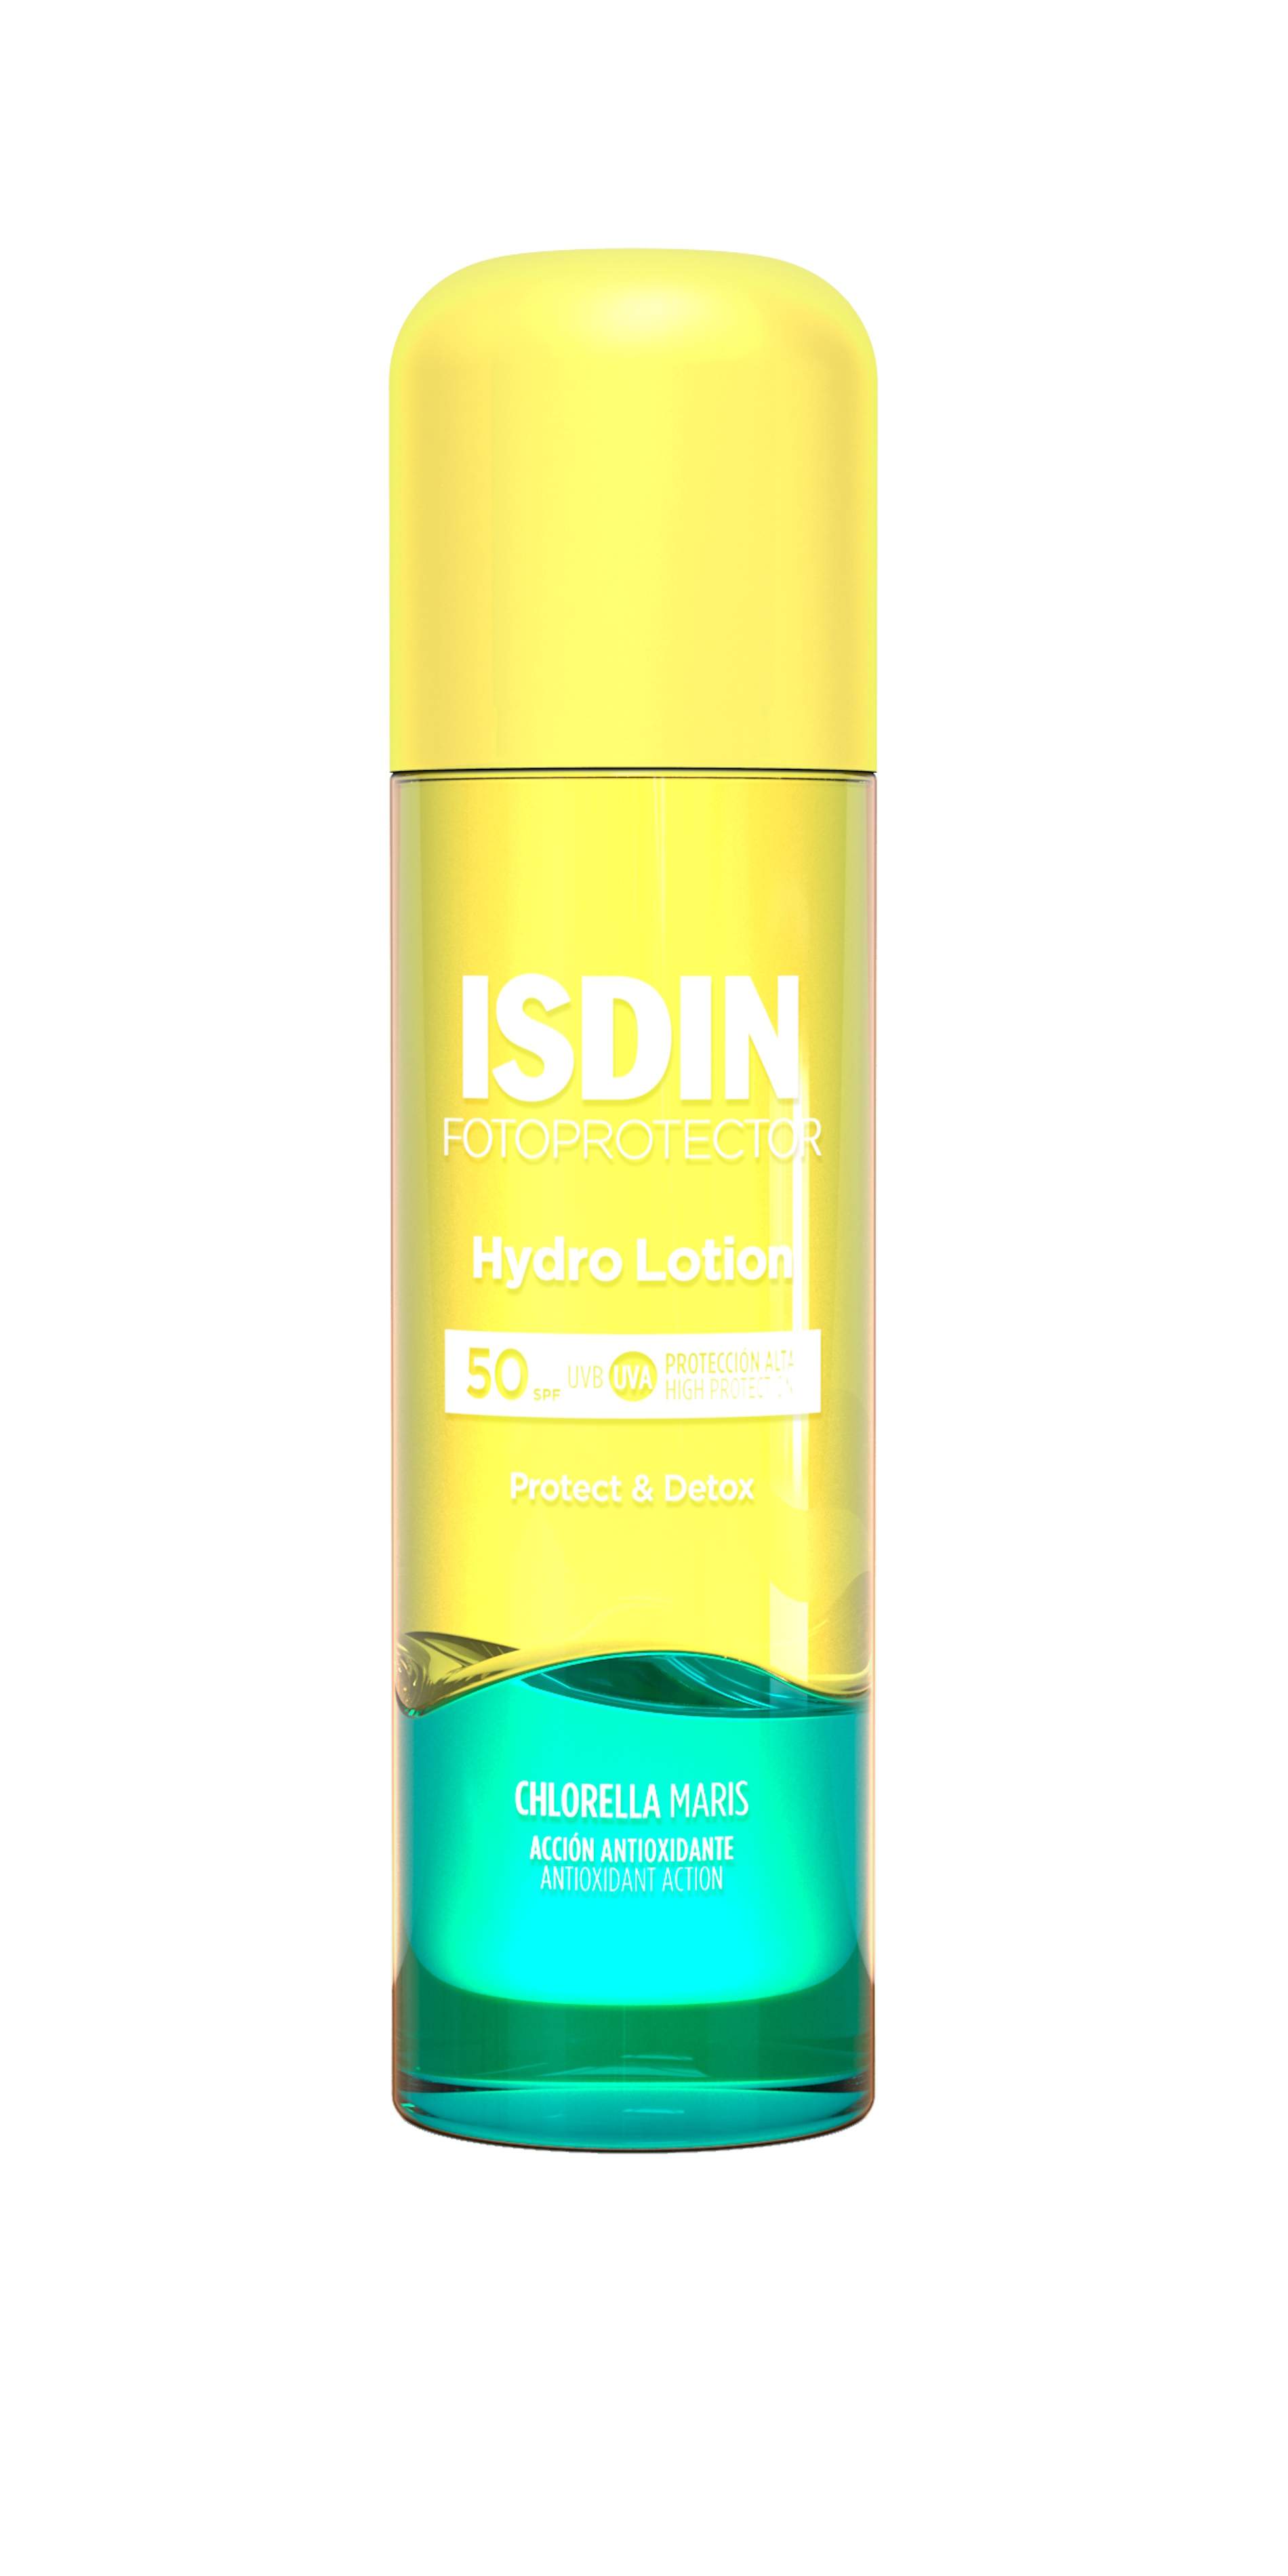 ISIDIN fotoprotector Hydro Lotion / Tinkle